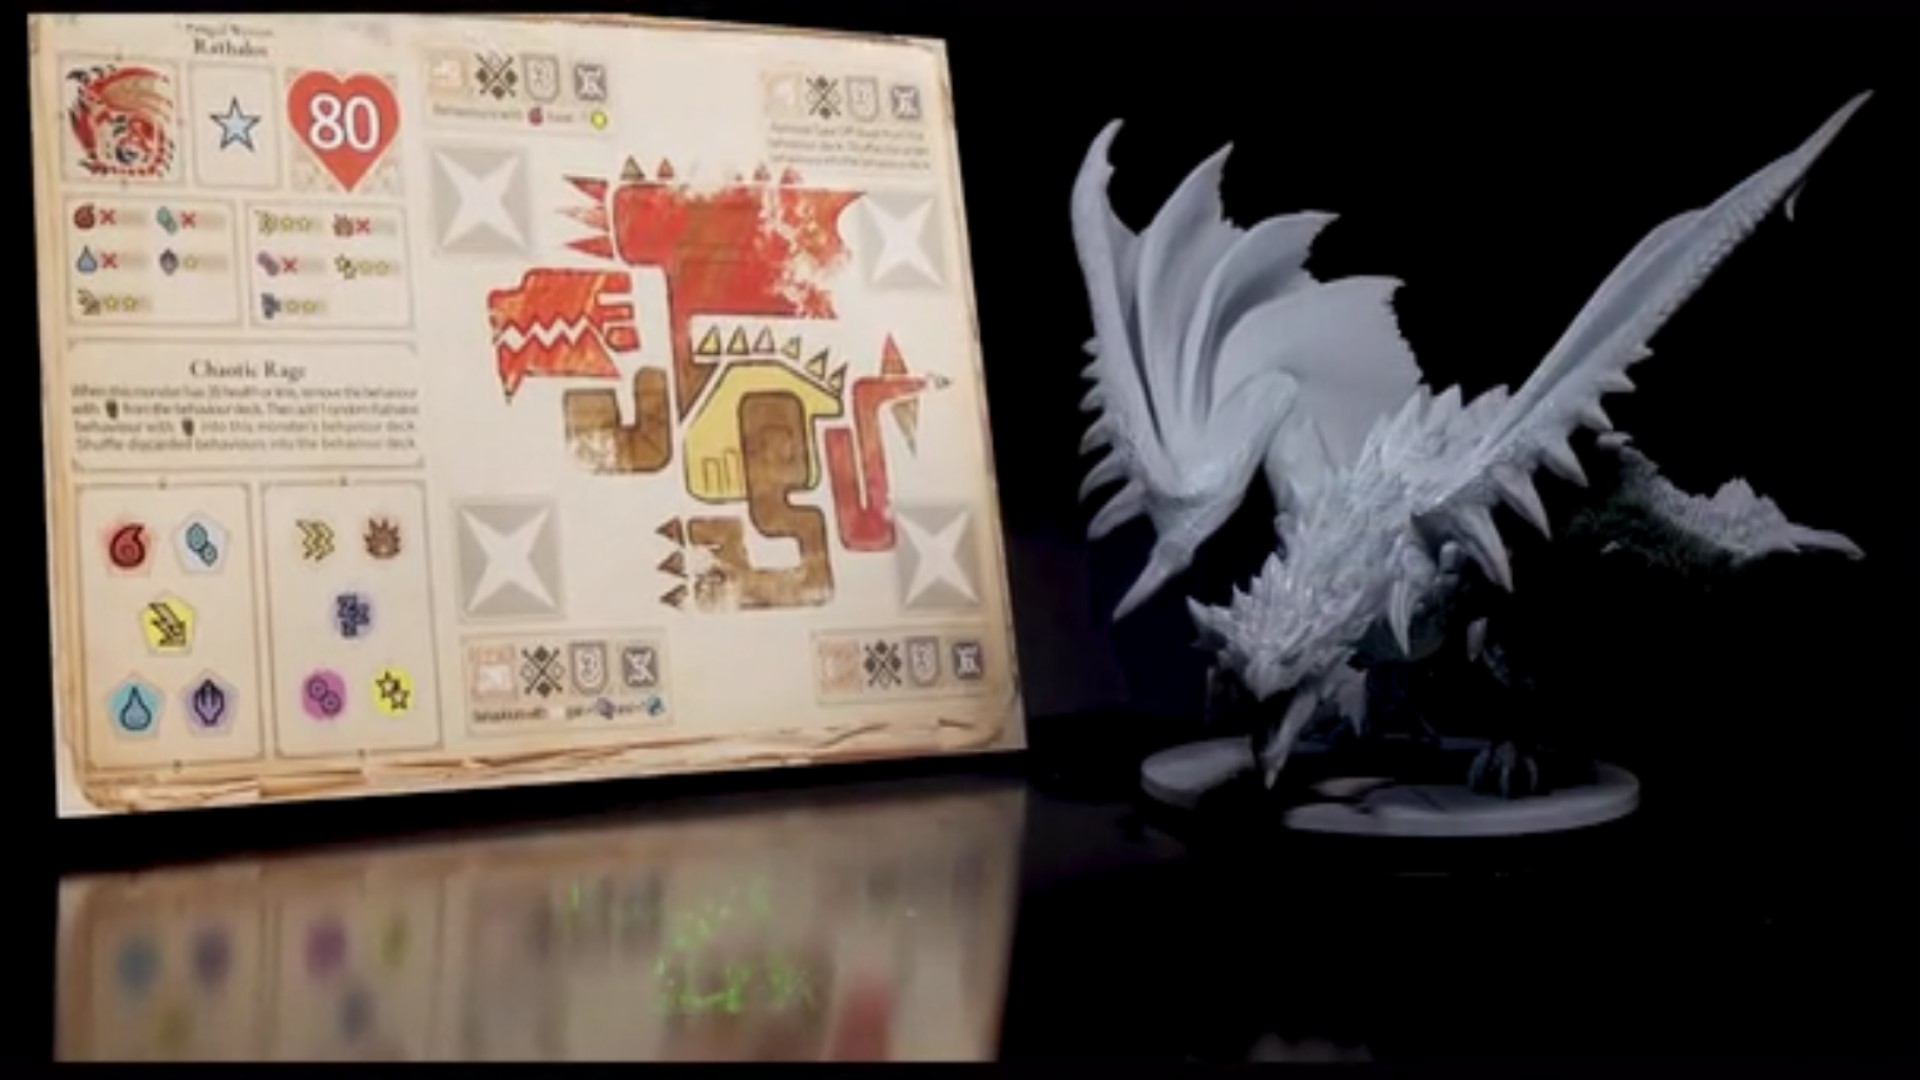 A close up look of the Rathalos miniature with a Health Sheet nearby